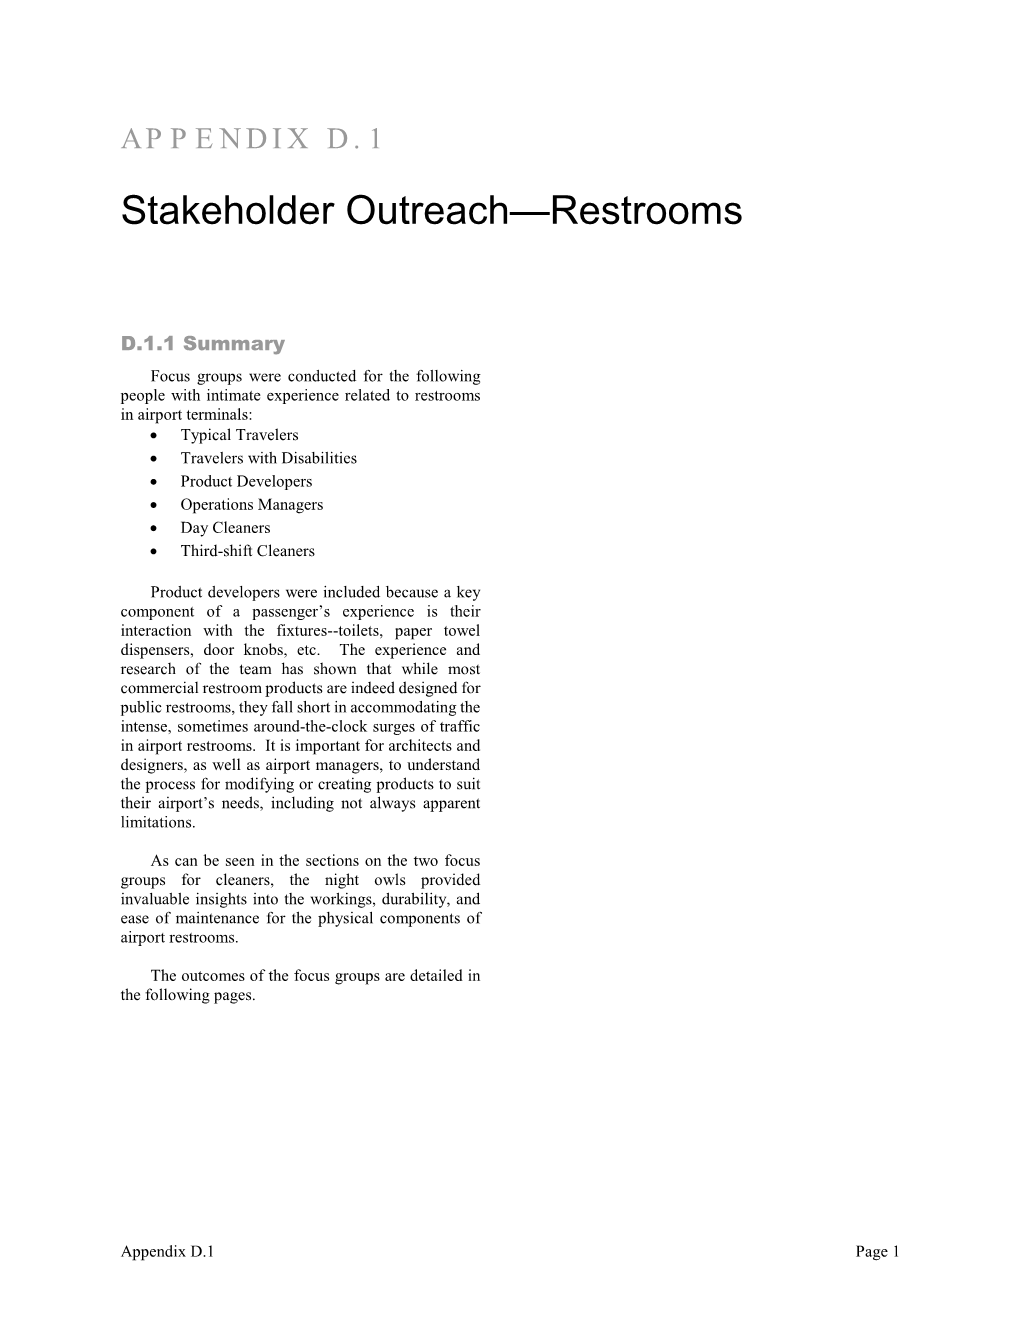 Stakeholder Outreach—Restrooms